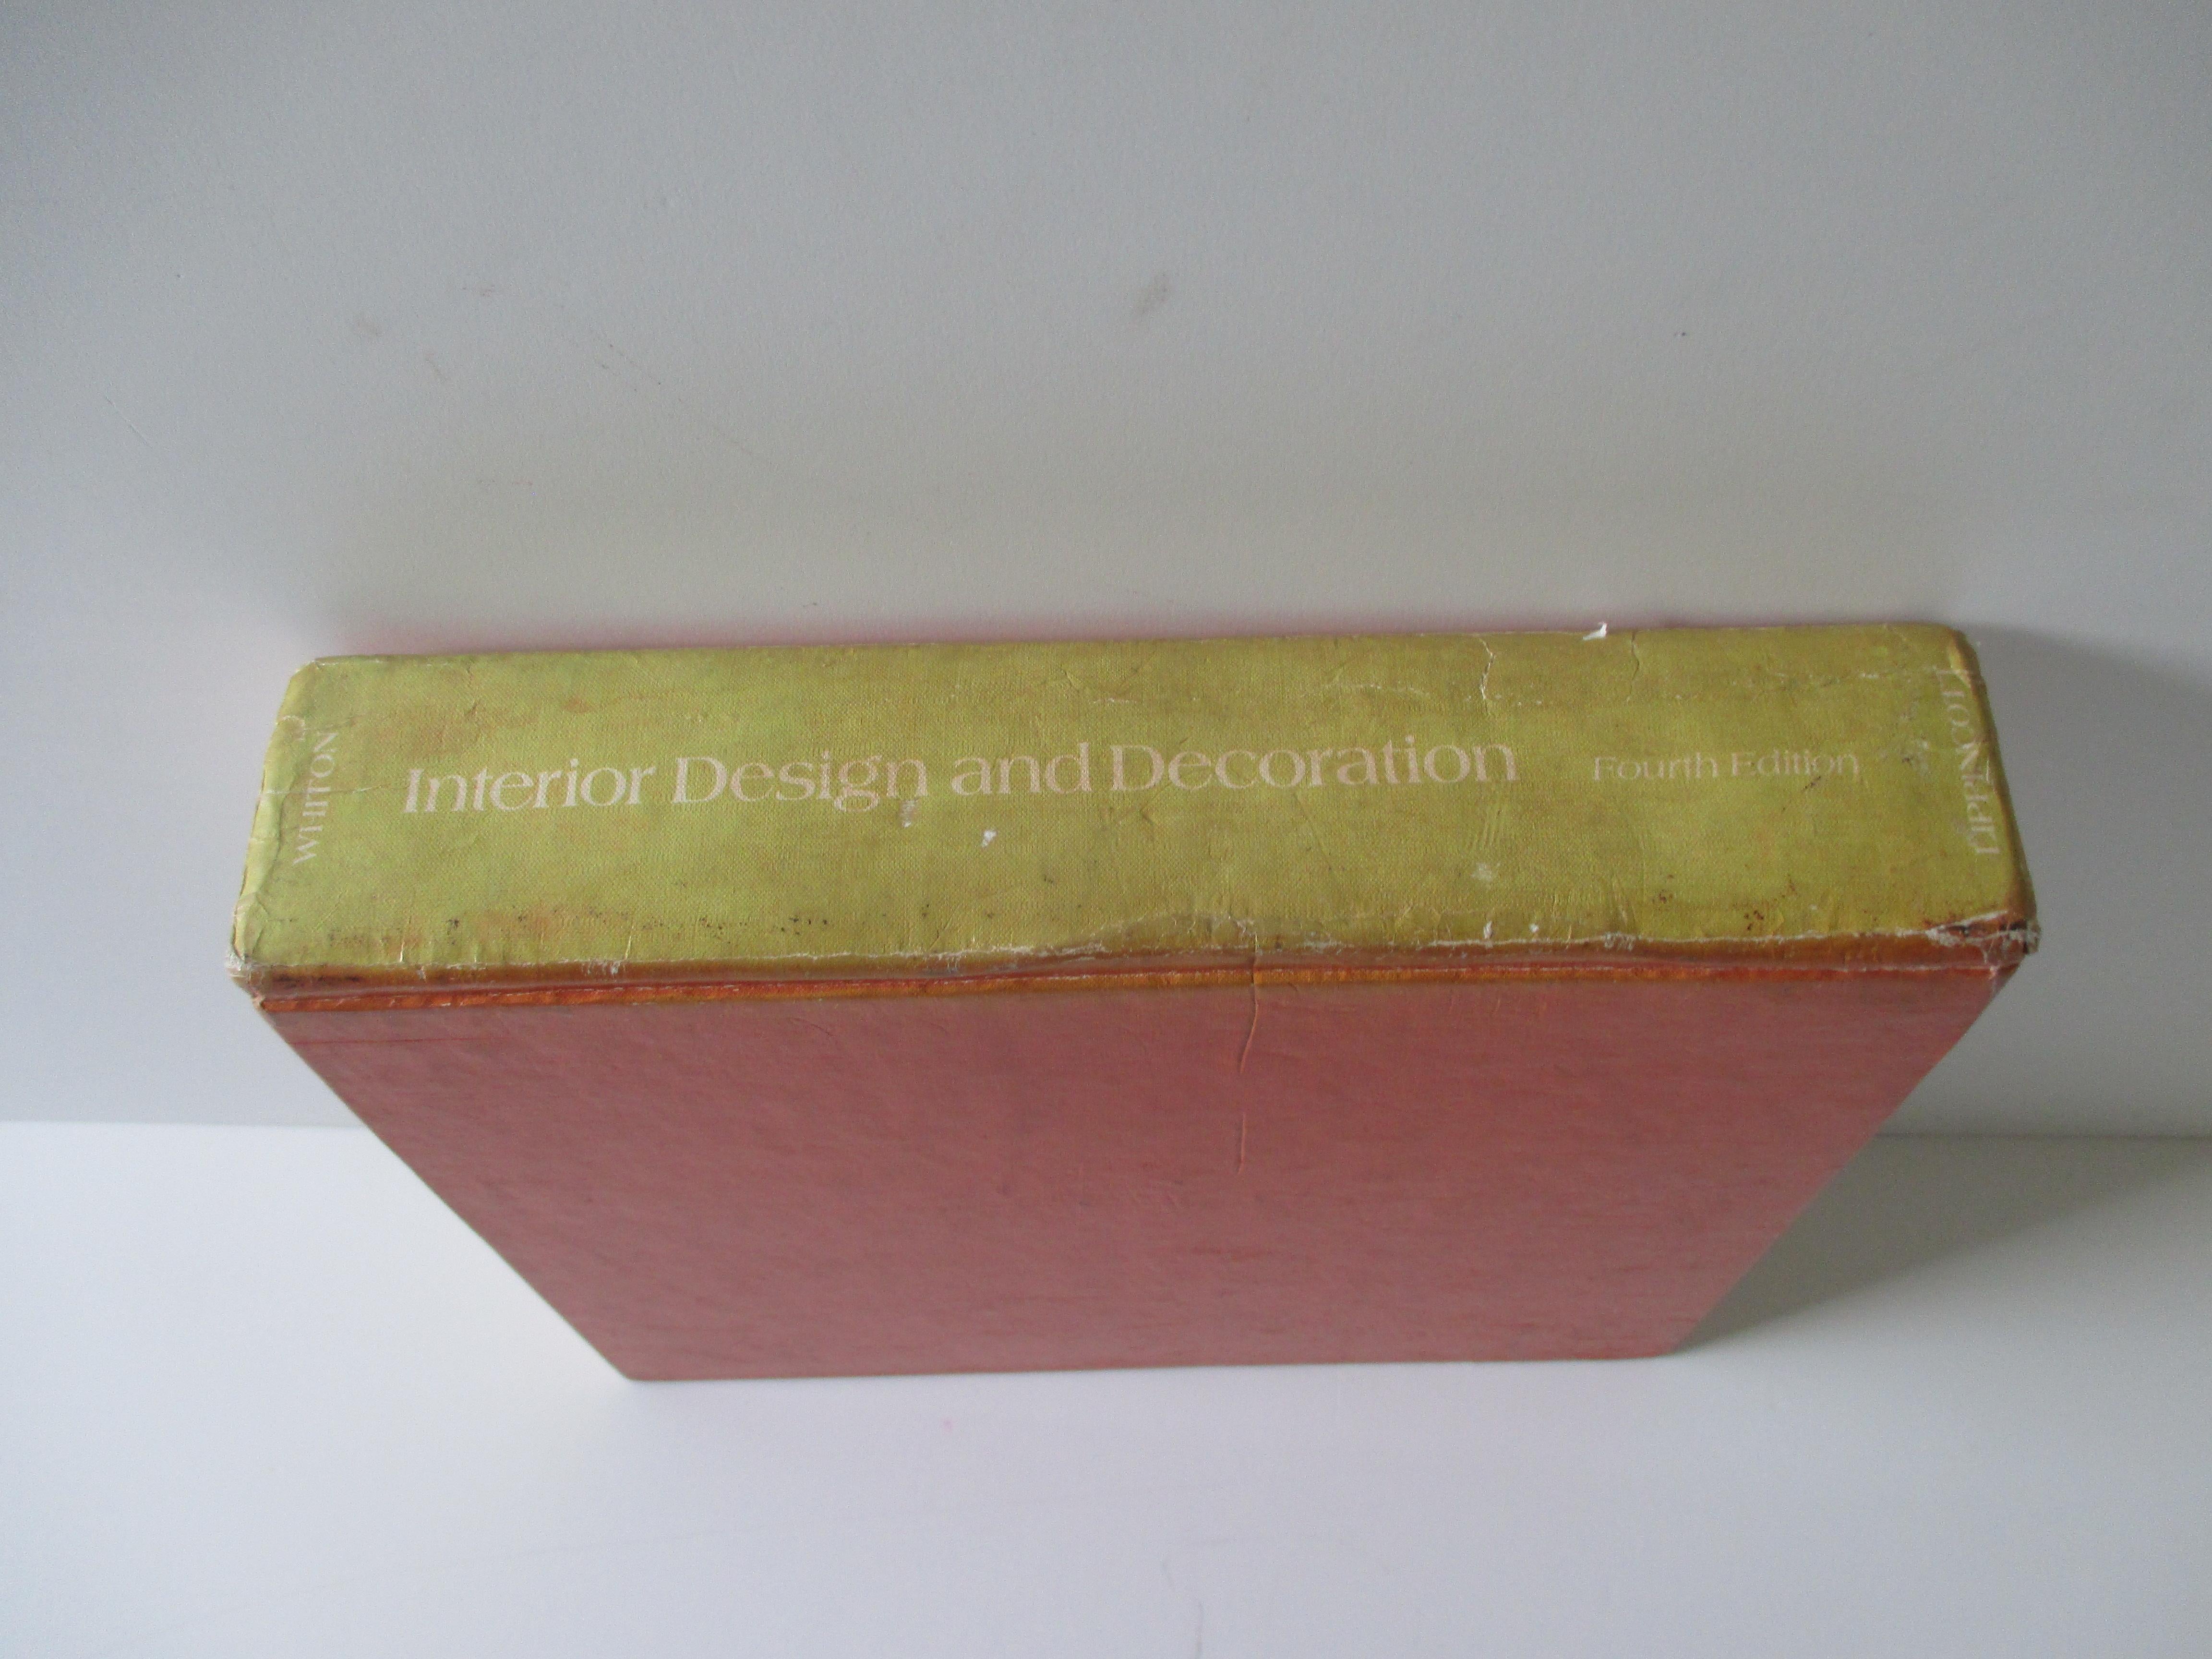 Late 20th Century Interior Design and Decoration Hard Cover Book, Fourth Edition